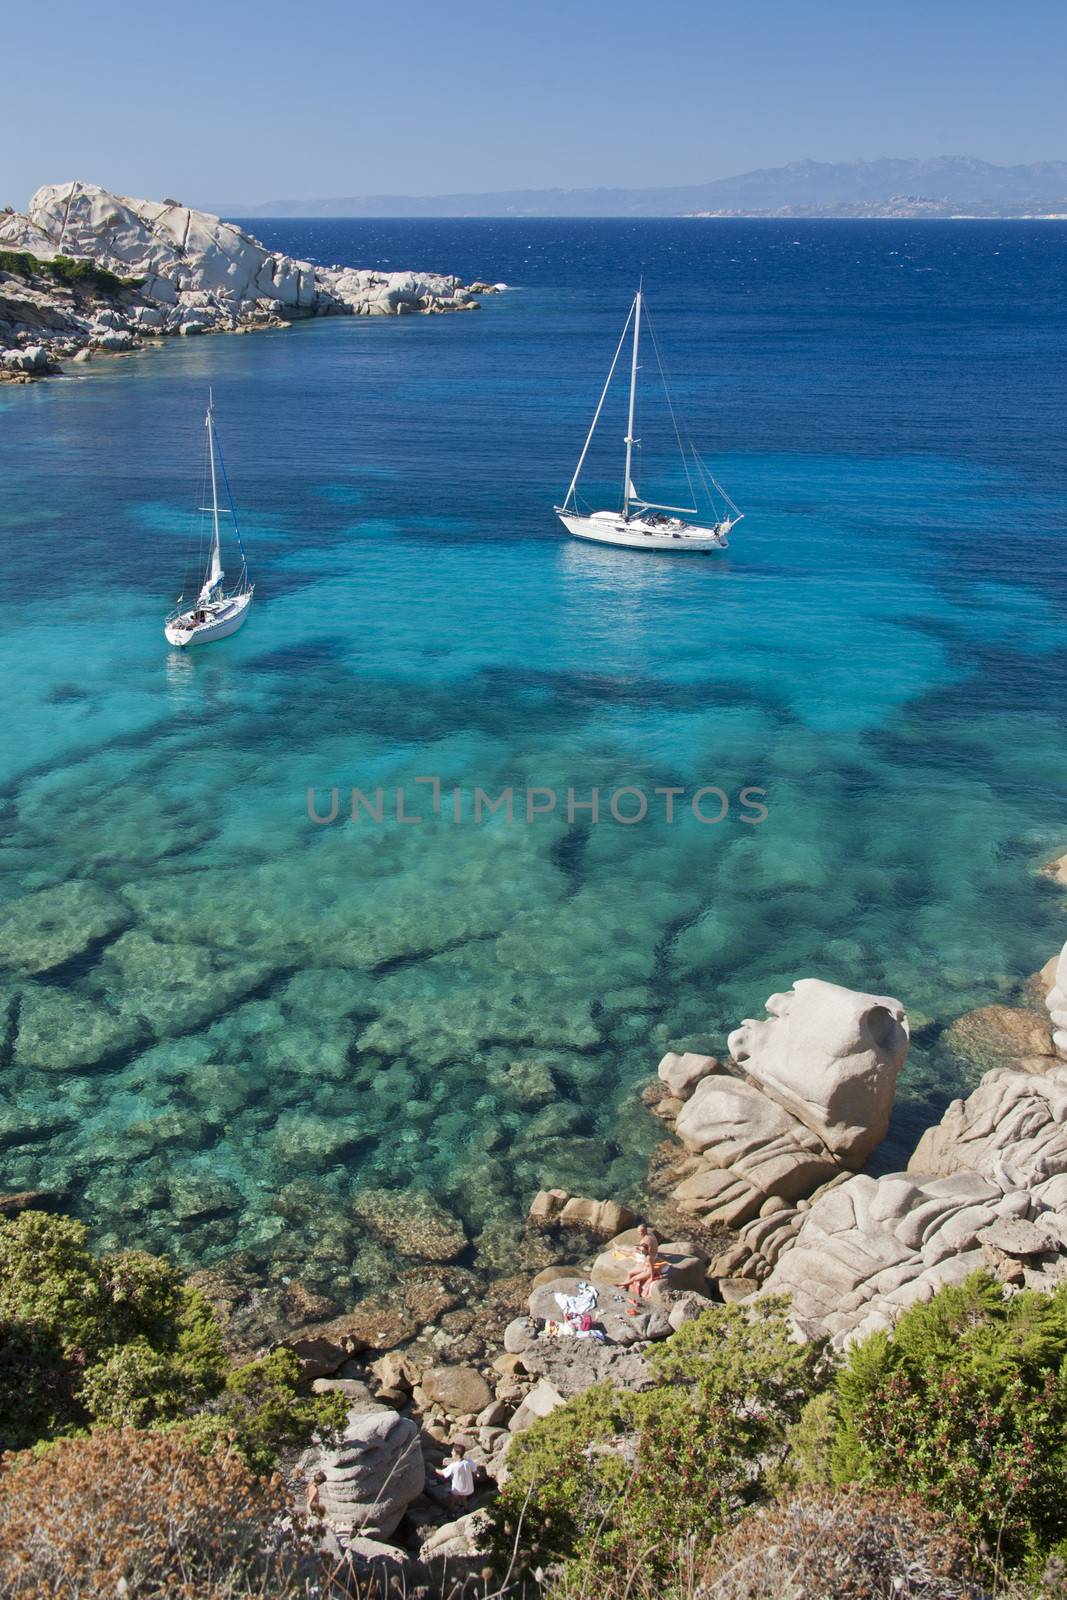 The wonderful colors of the sea in cala spinosa, a bay of Capo Testa, in Gallura